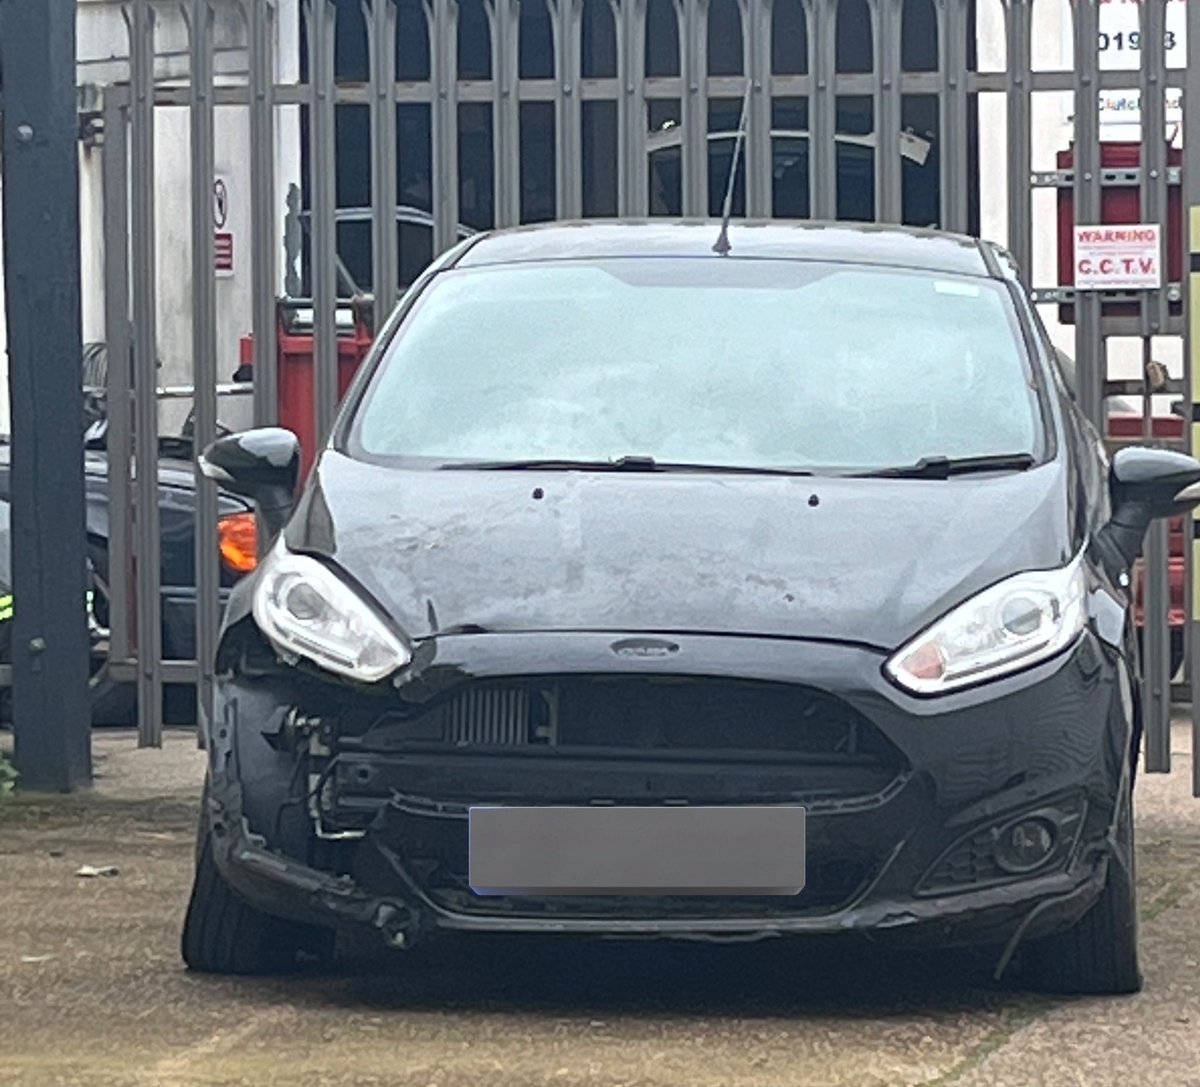 This a reminder to check its legality when purchasing a vehicle. The new owner thought they were getting a bargain but when it went for repair, it was discovered that it had been reported as STOLEN… Vehicle recovered to the rightful owner. #roadspolicing